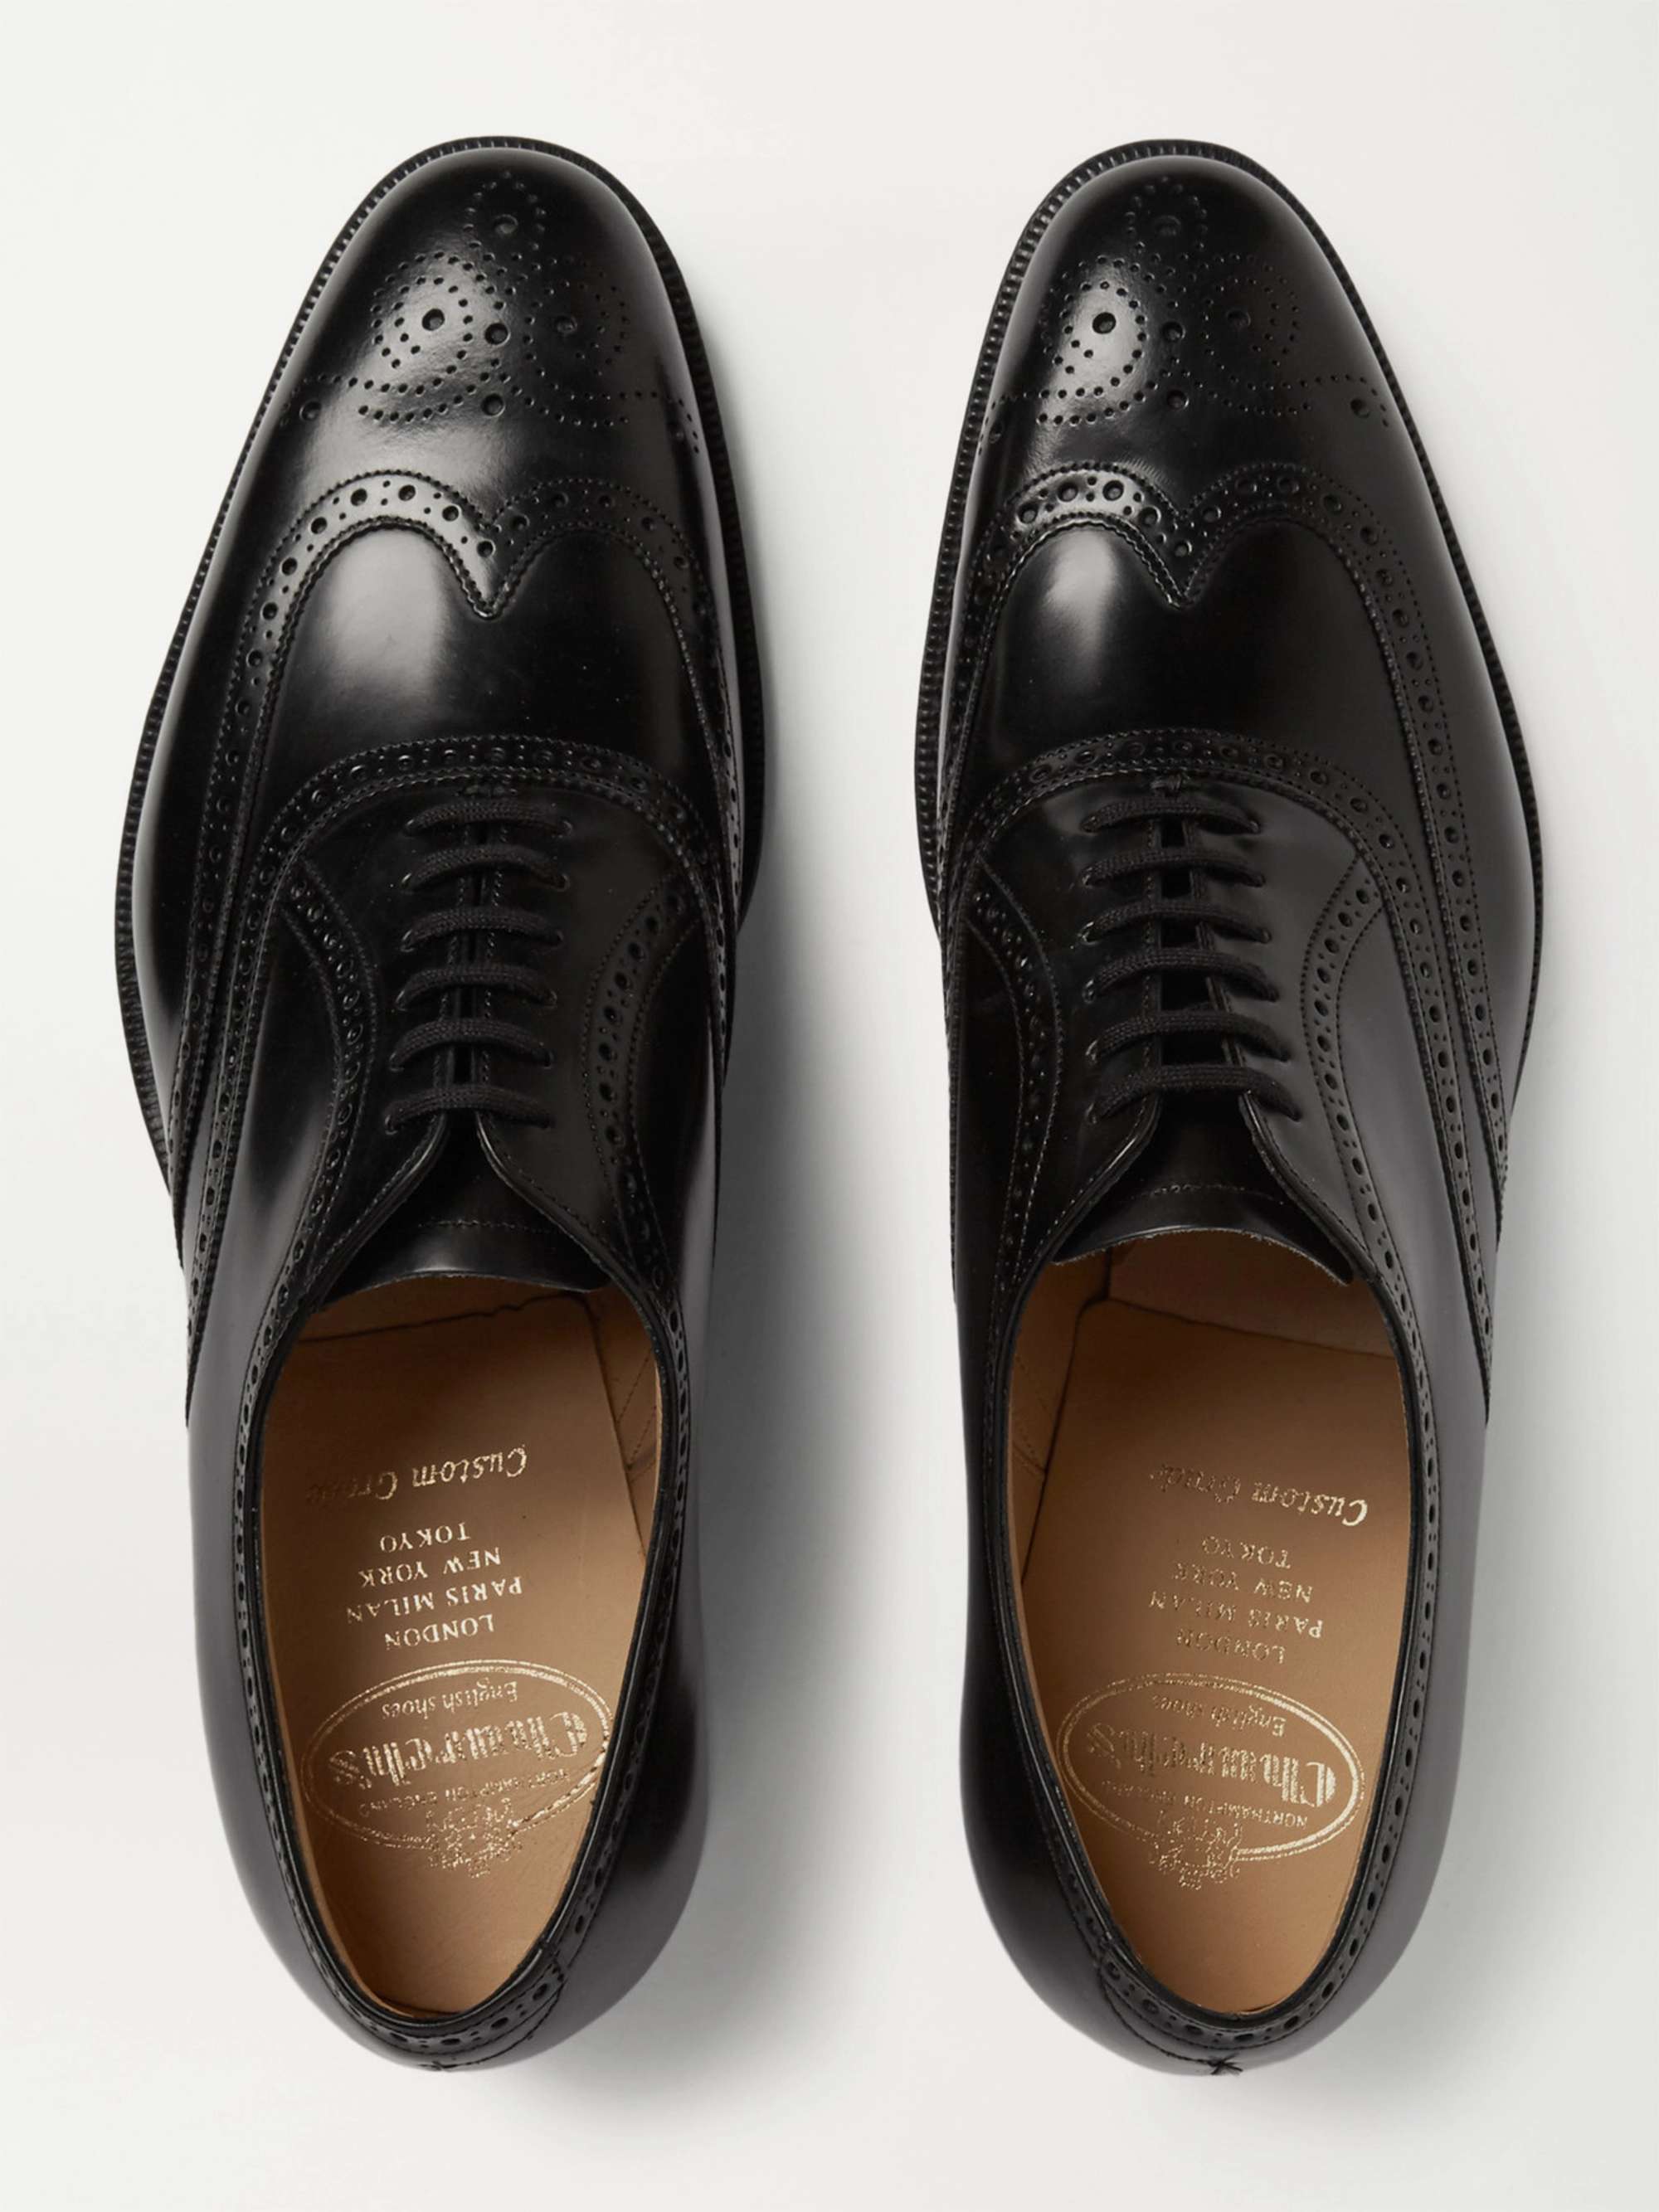 Cornwall a cup of Prick Black Berlin Leather Wingtip Brogues | CHURCH'S | MR PORTER